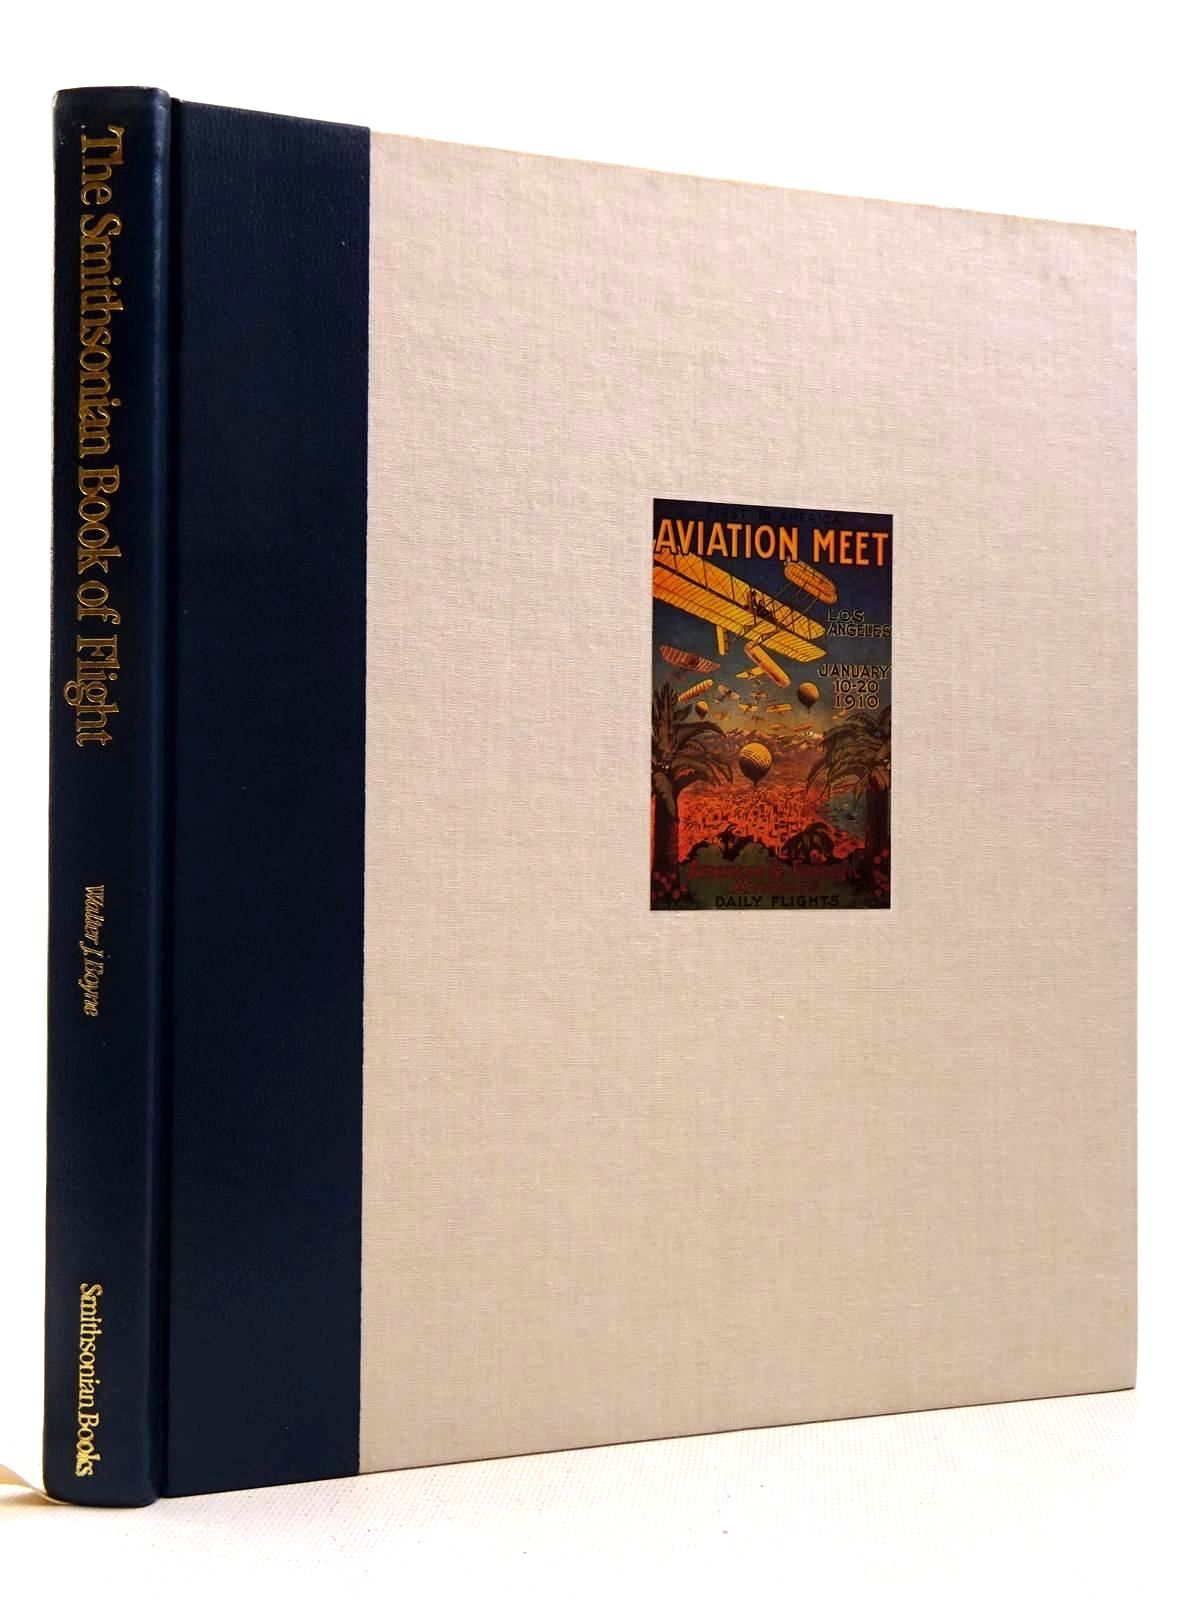 Photo of THE SMITHSONIAN BOOK OF FLIGHT written by Boyne, Walter J. published by Smithsonian Books, Orion Books (STOCK CODE: 2129141)  for sale by Stella & Rose's Books